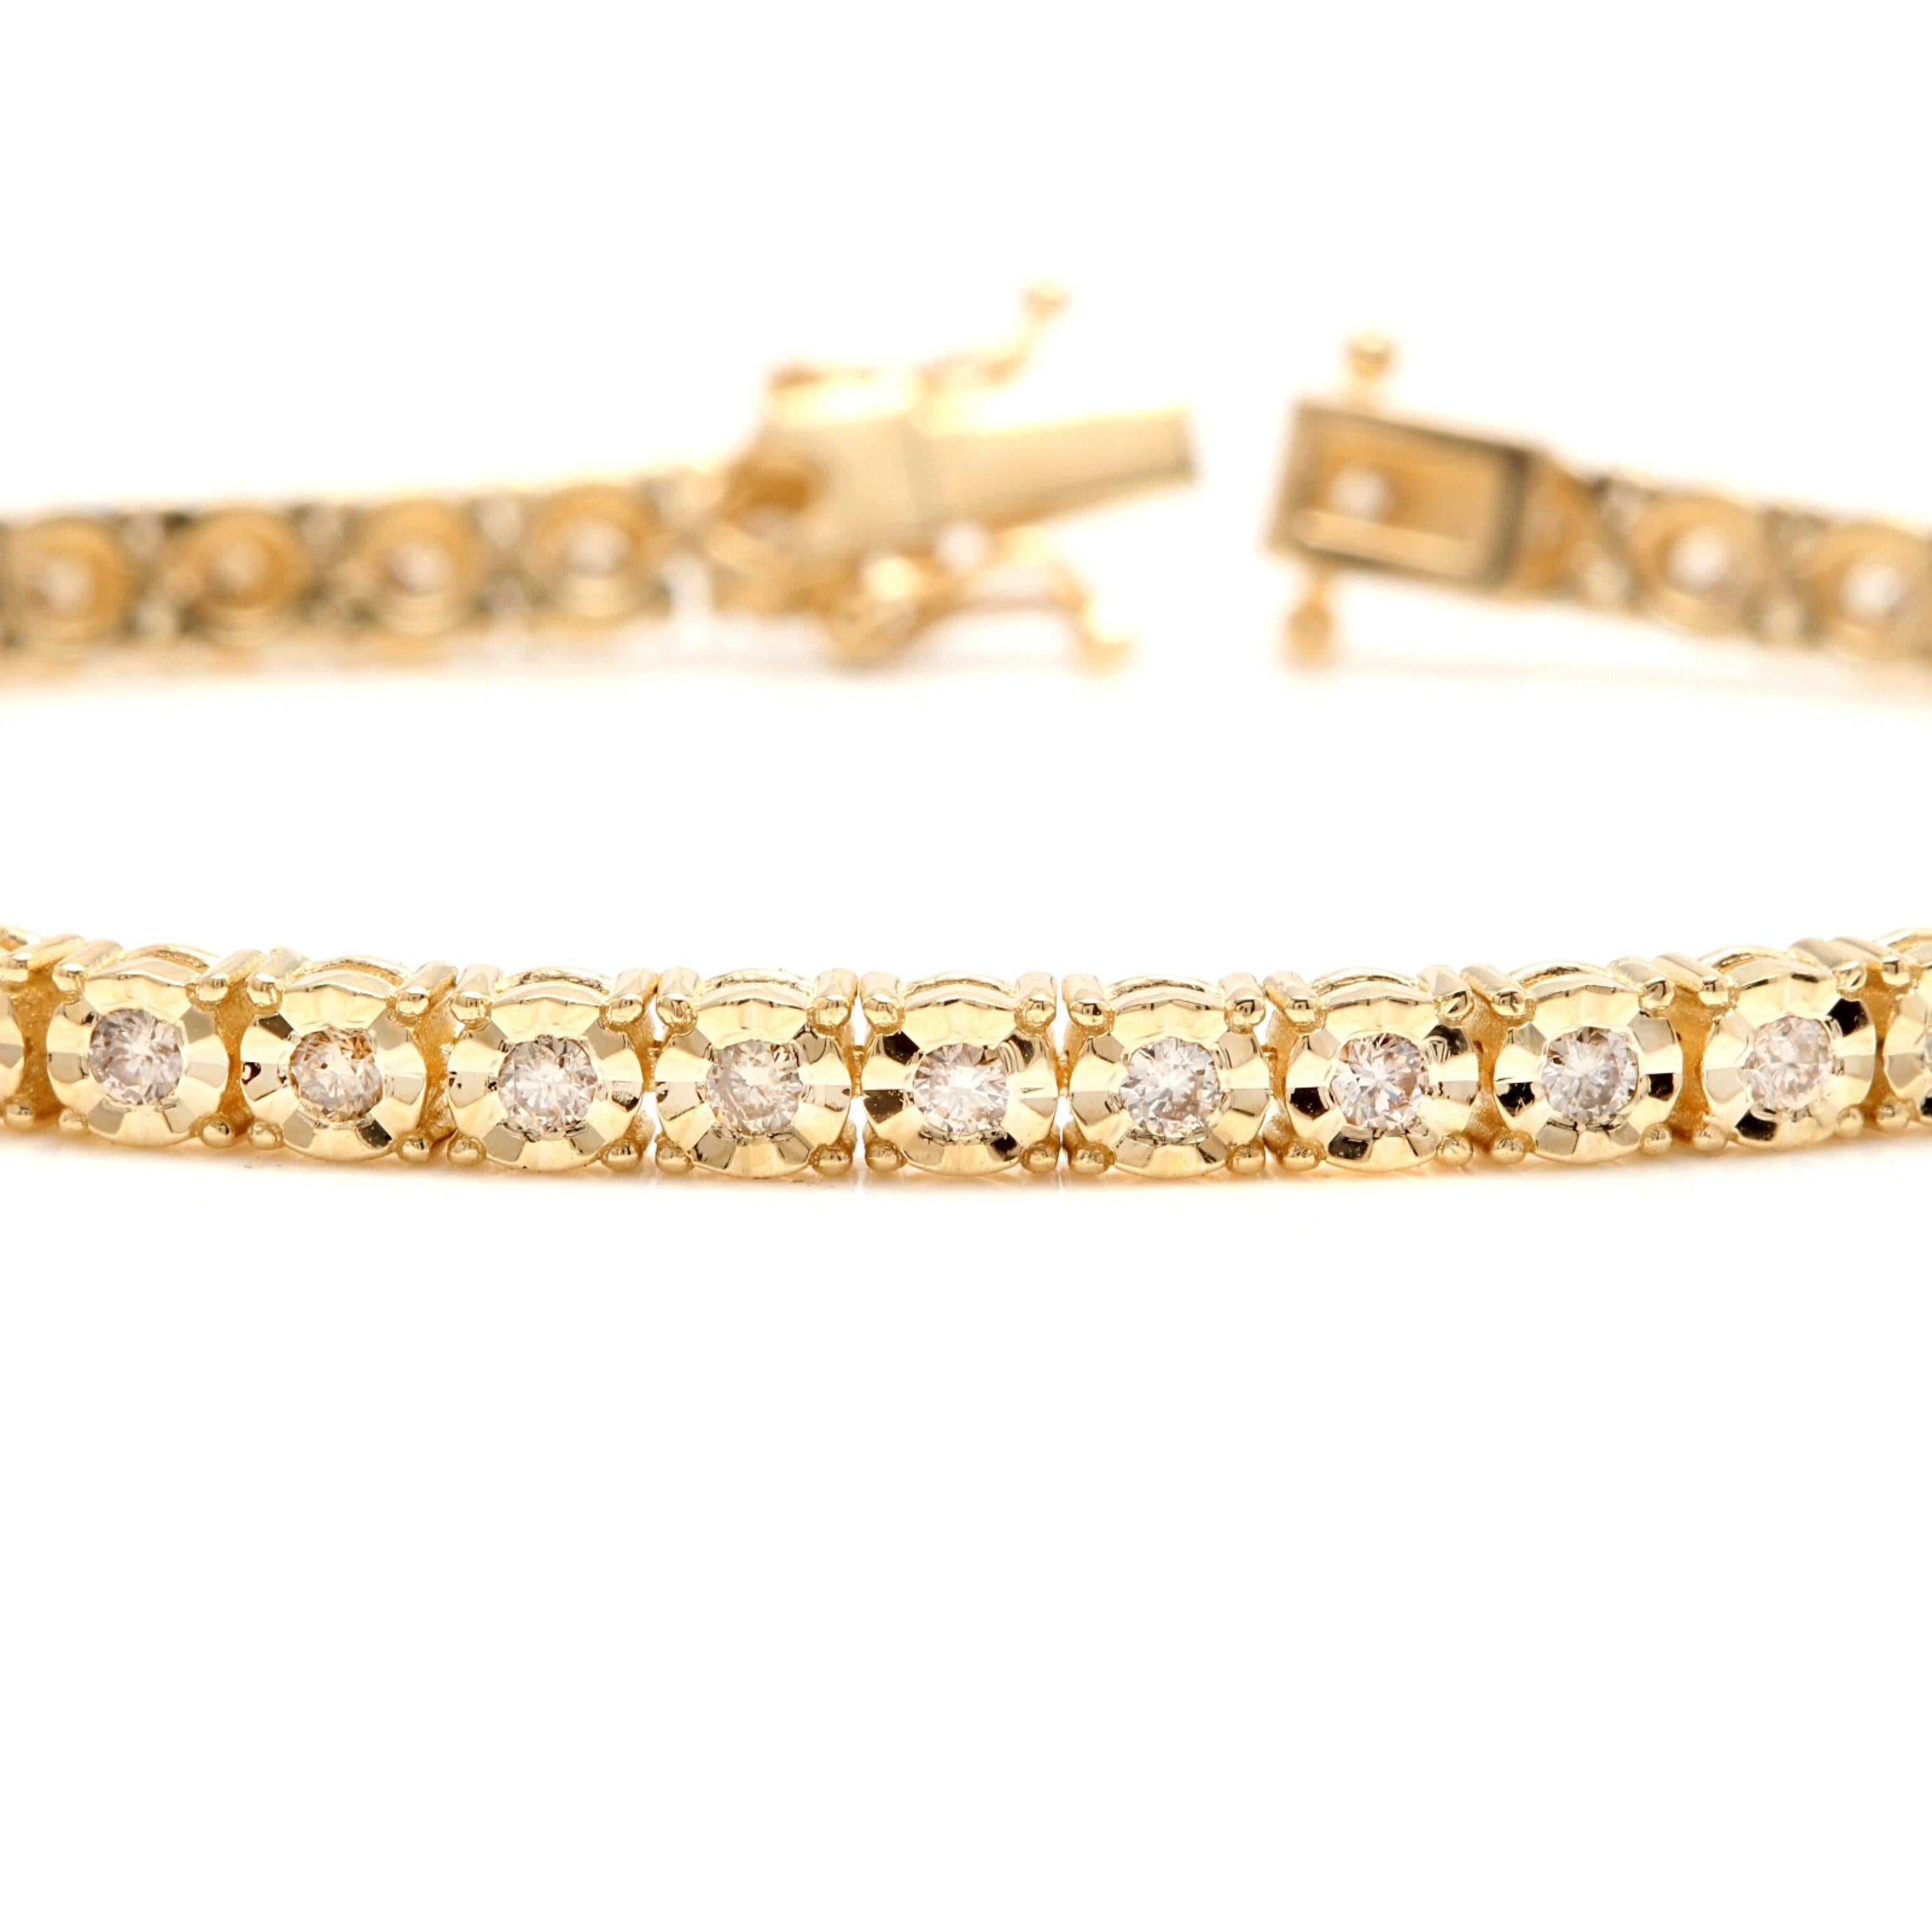 Very Impressive 2.60 Carats Natural Diamond 14K Solid Yellow Gold Tennis Bracelet

STAMPED: 14K

Total Natural Round Diamonds Weight: Approx. 2.60 Carats (37pcs.) (color J-K / Clarity SI1-SI2)

Bracelet Length is:  7 inches

Width: 4.6mm

Bracelet